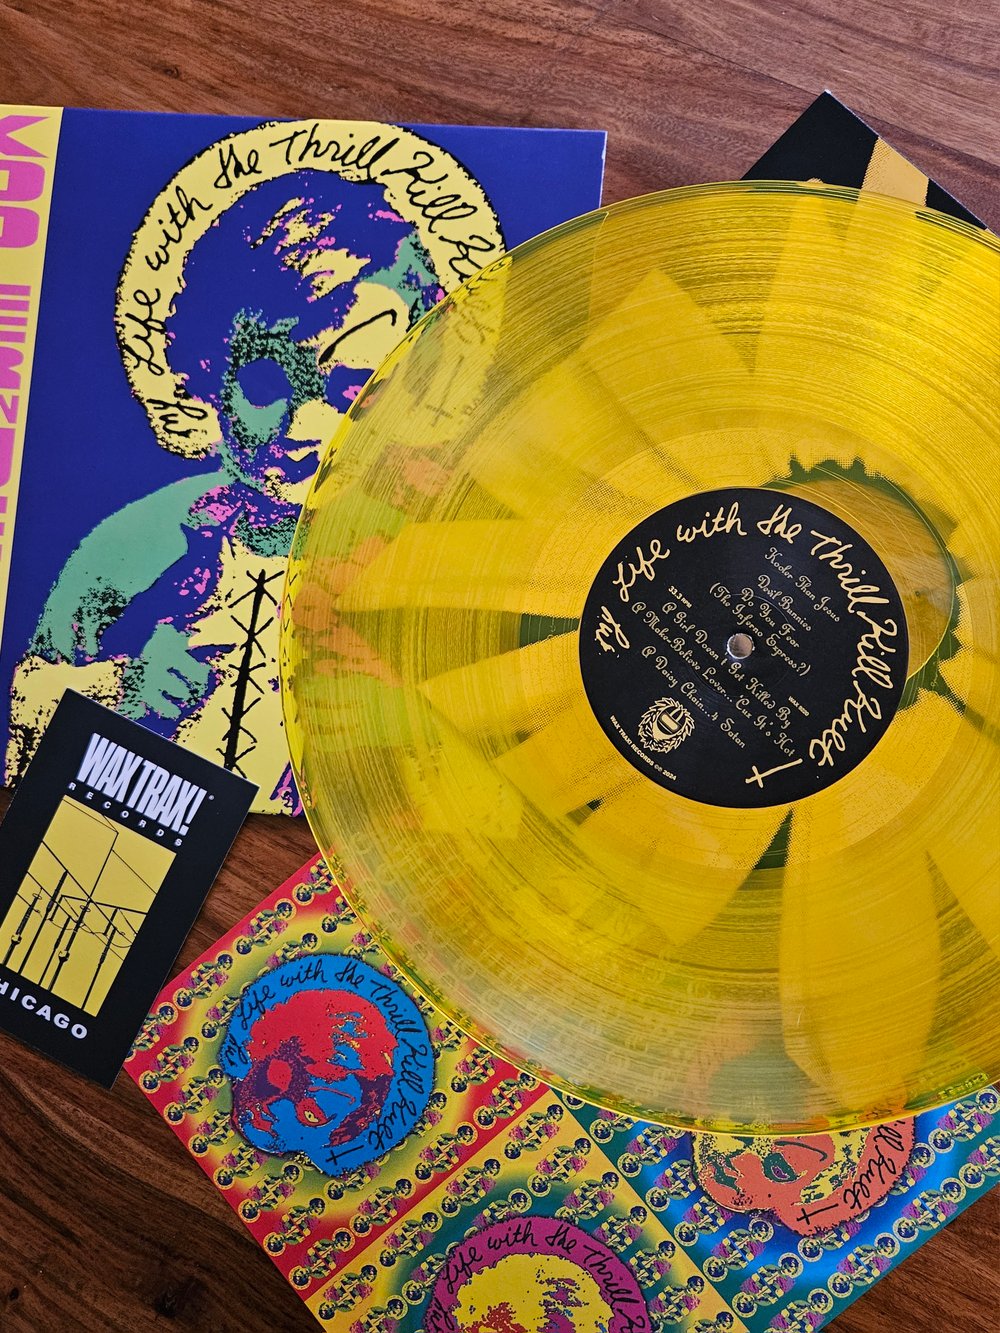 My Life With The Thrill Kill Kult - Kooler Than Jesus Expanded -  RSD Edition